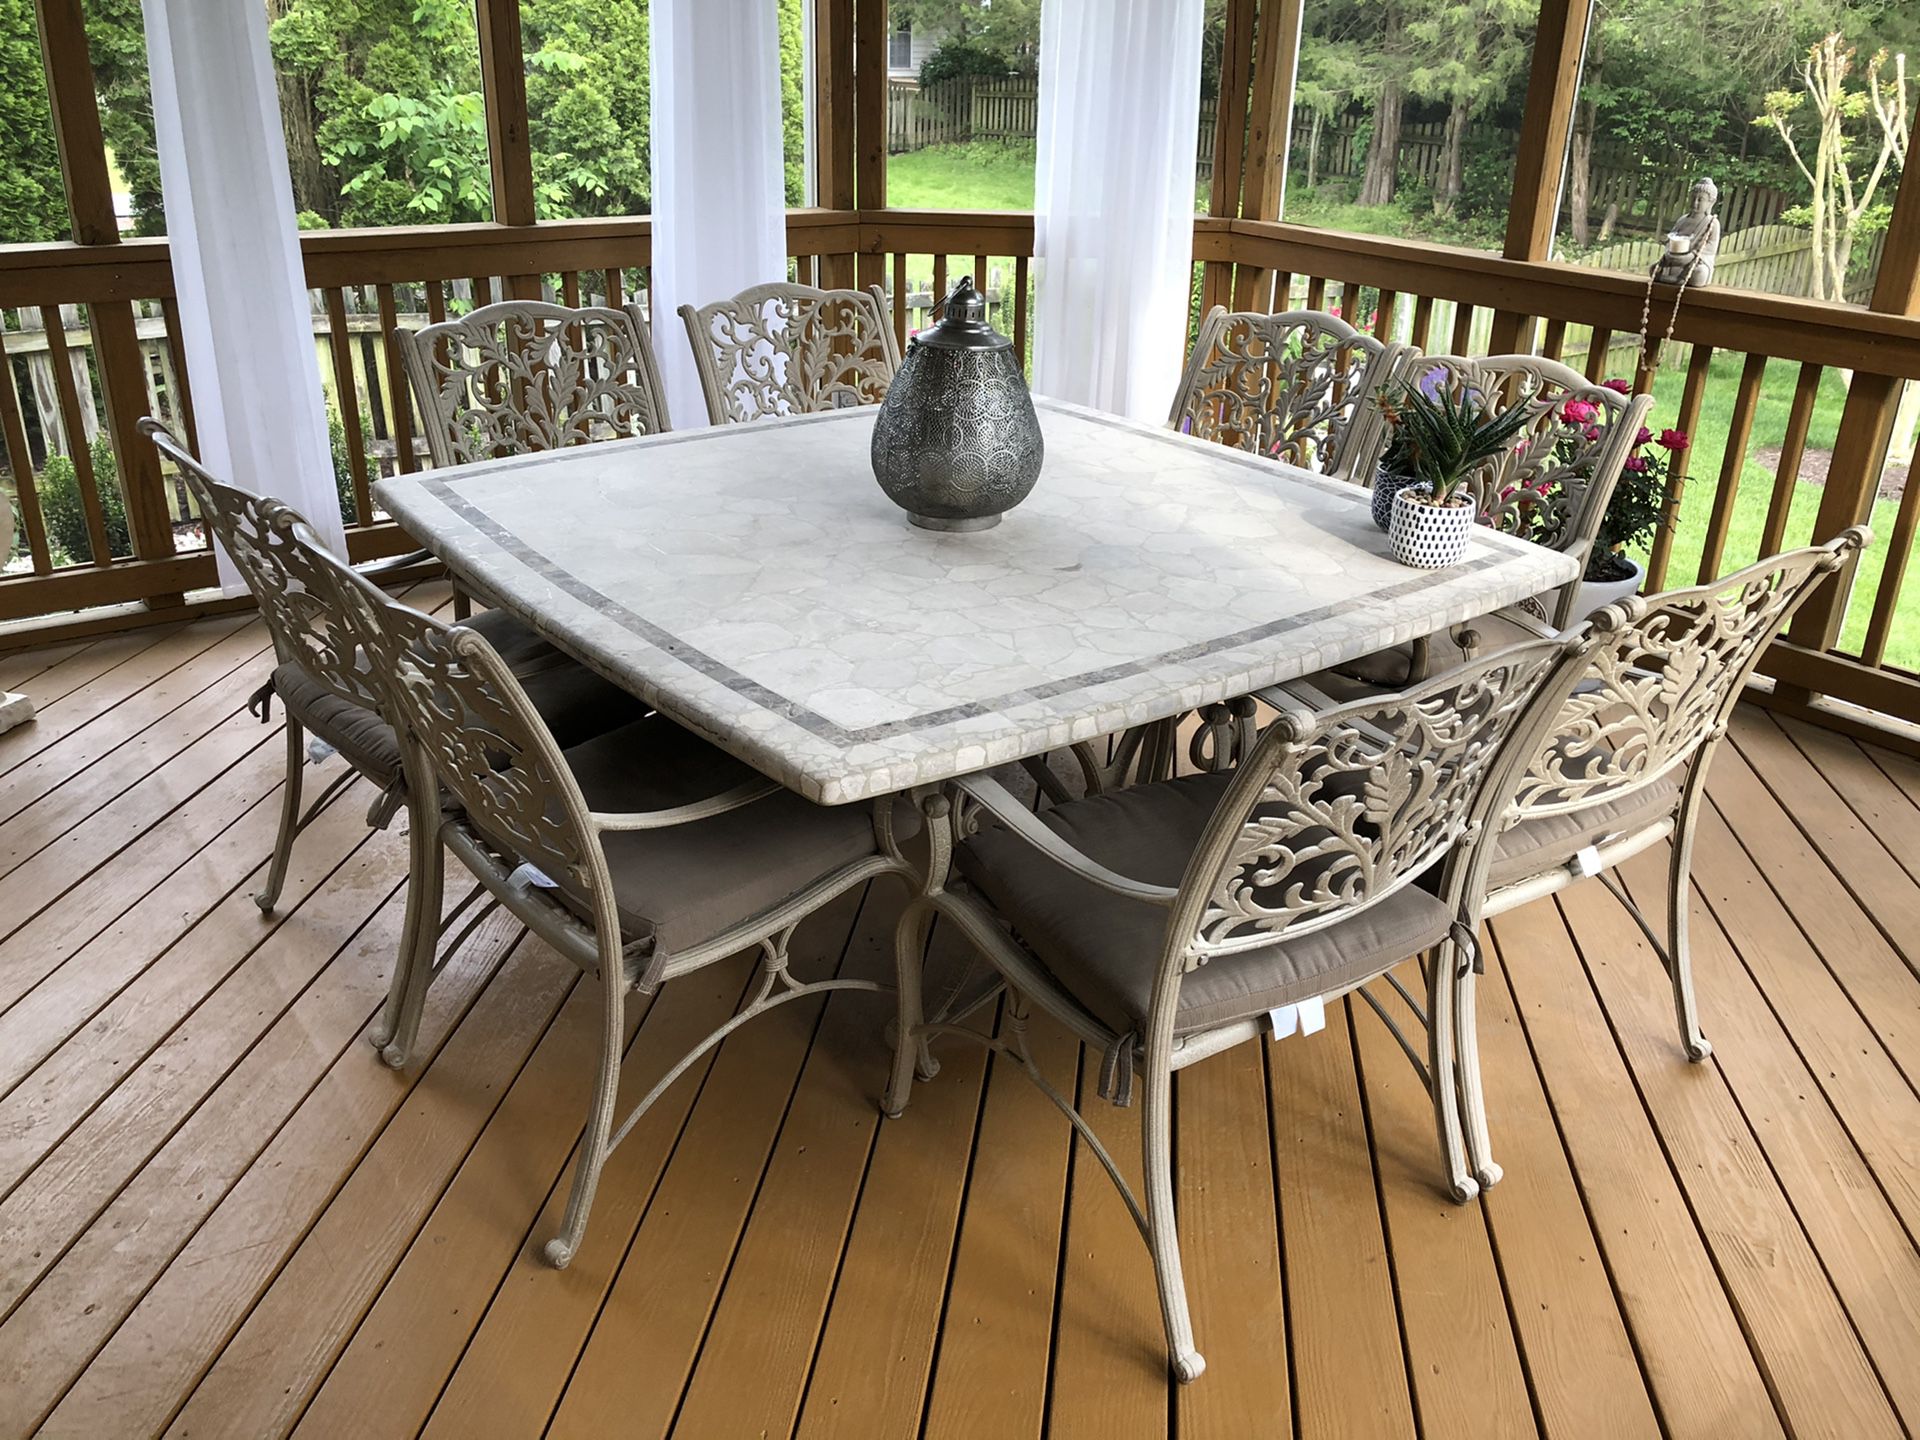 Outdoor Patio Set (Table, Umbrella, and 8 Cushion Chairs)